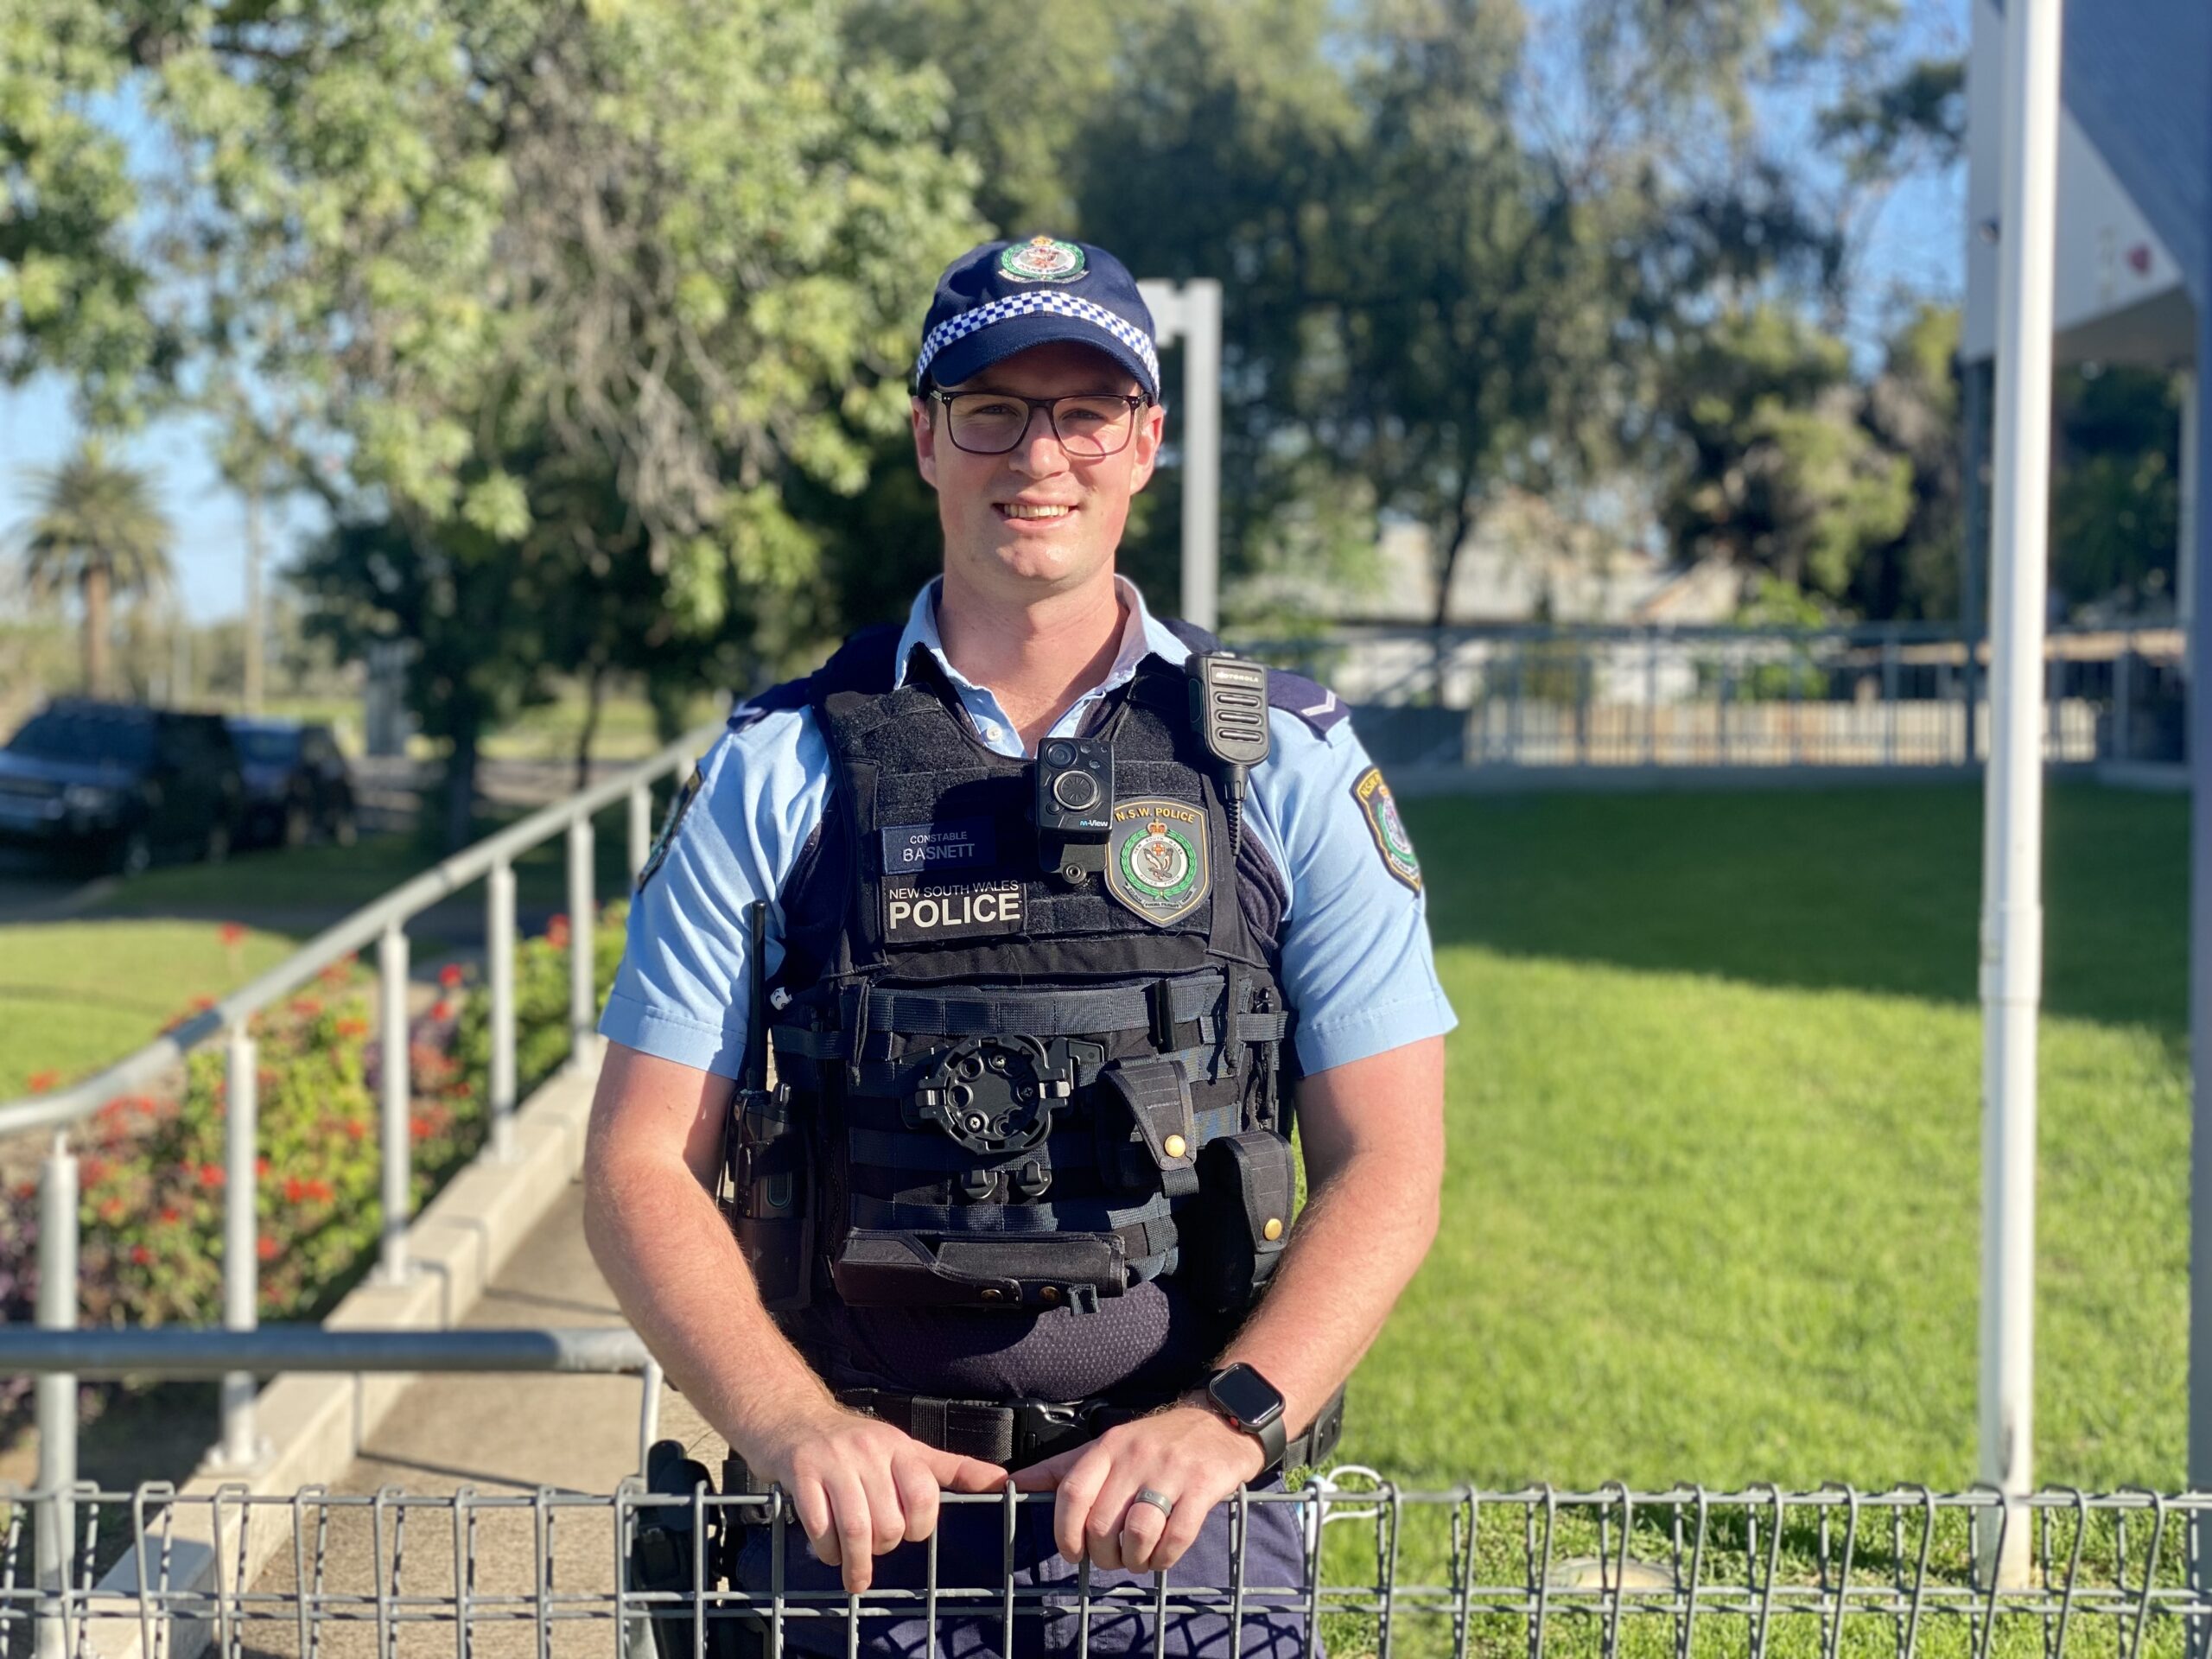 Wee Waa welcomes new police officer